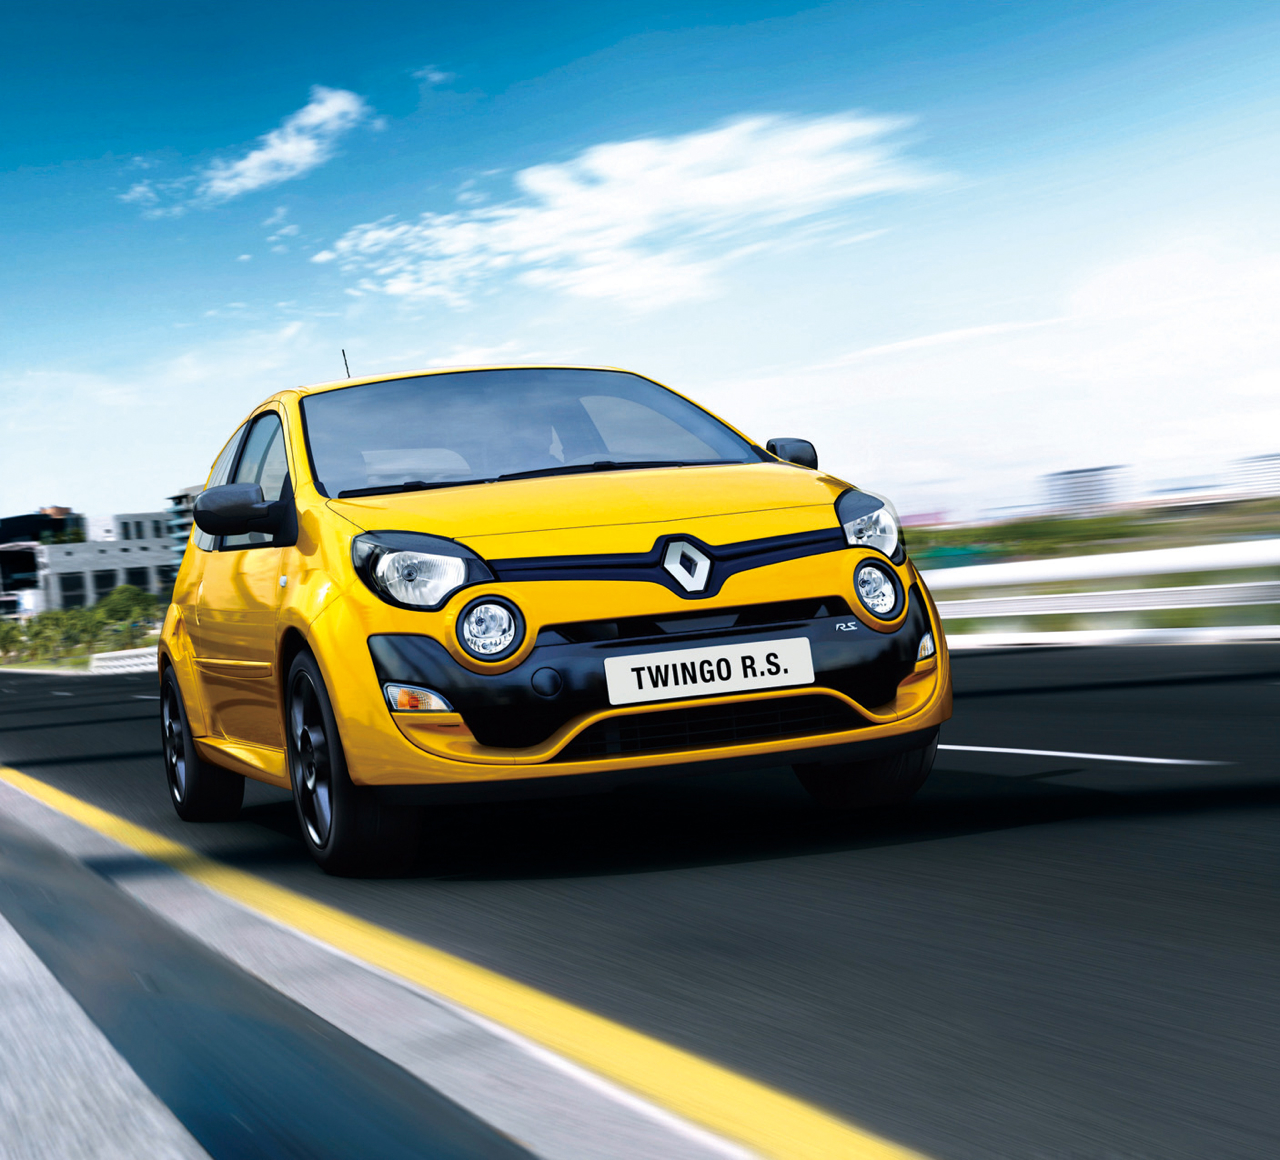 RENAULT TWINGO RENAULT SPORT (C44 RS) - PHASE 2